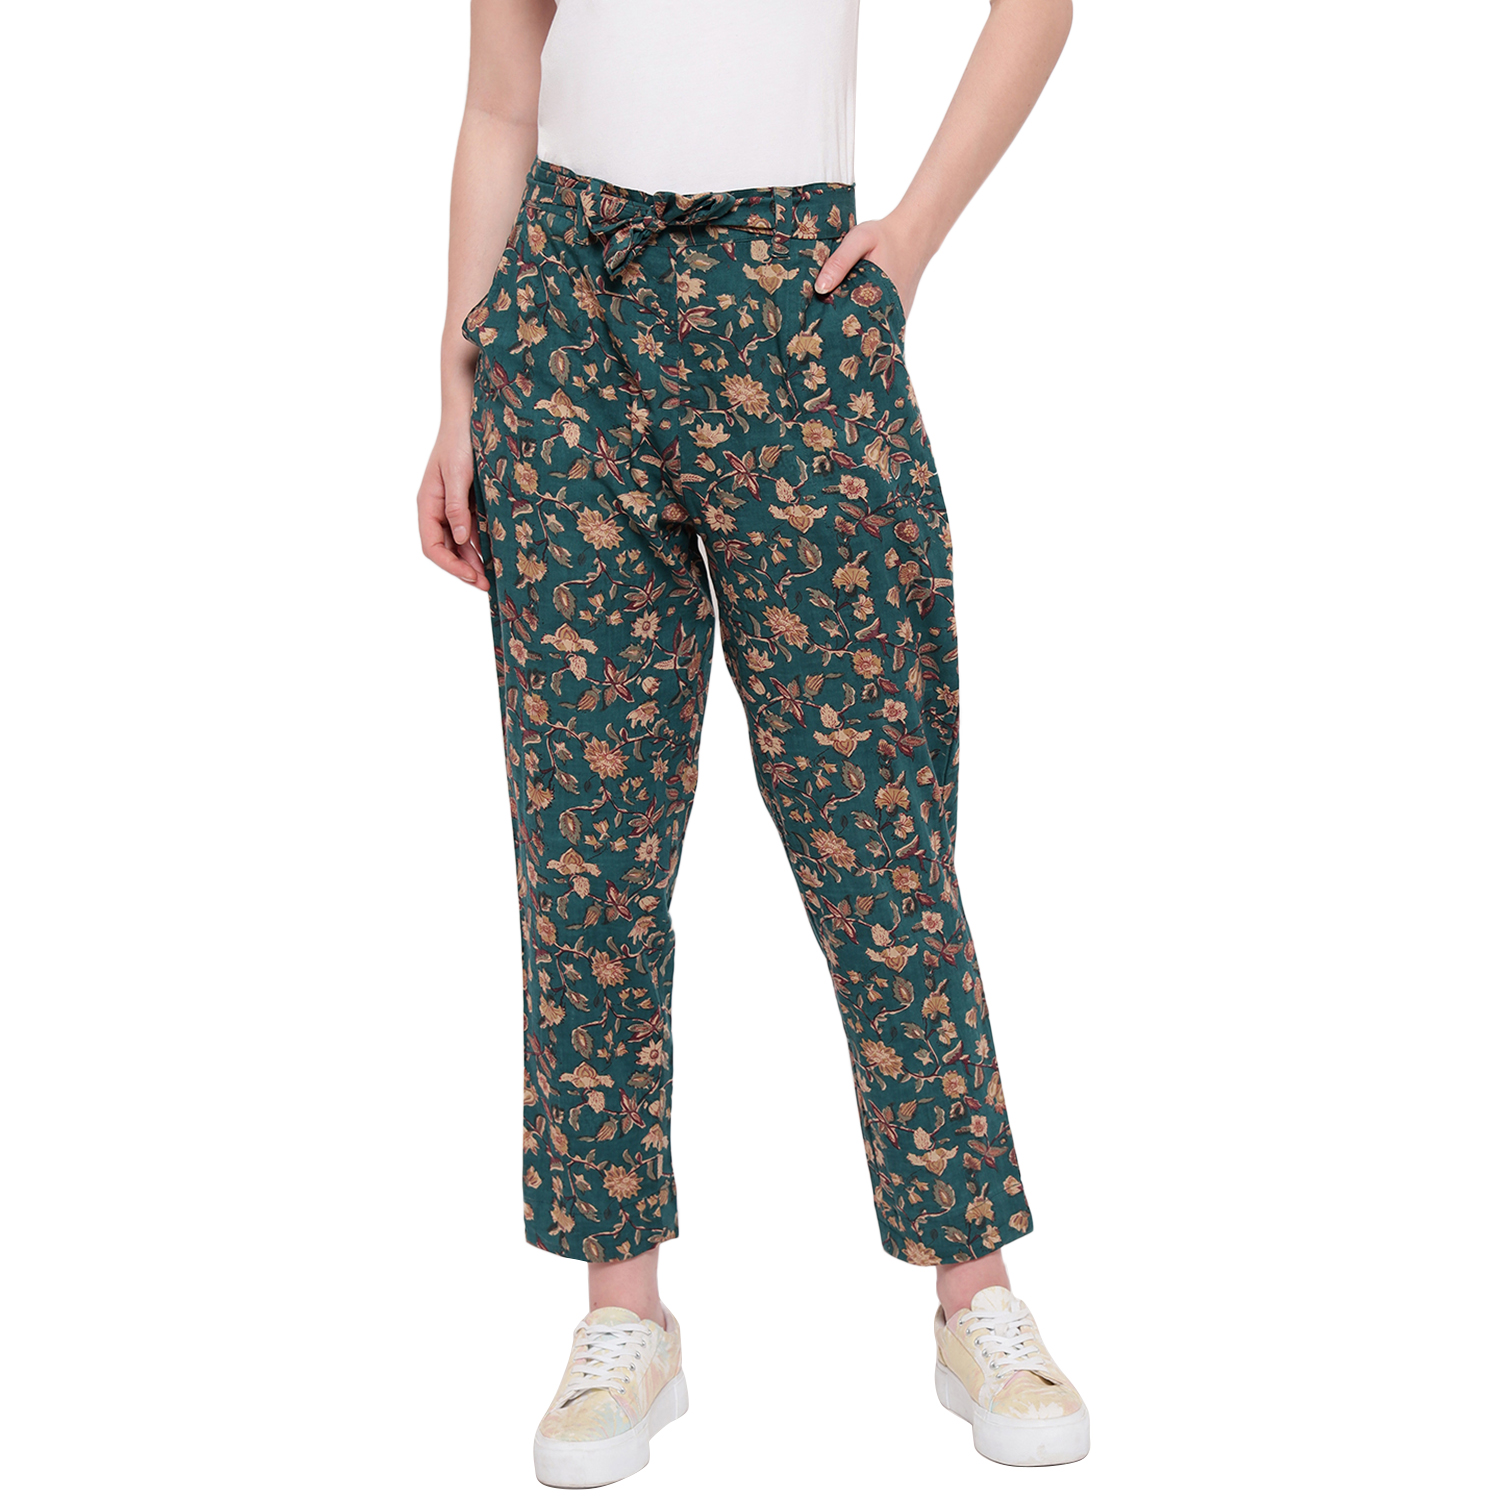 Buy Loose Women Trousers Online in India | loose Cotton Trousers Women's